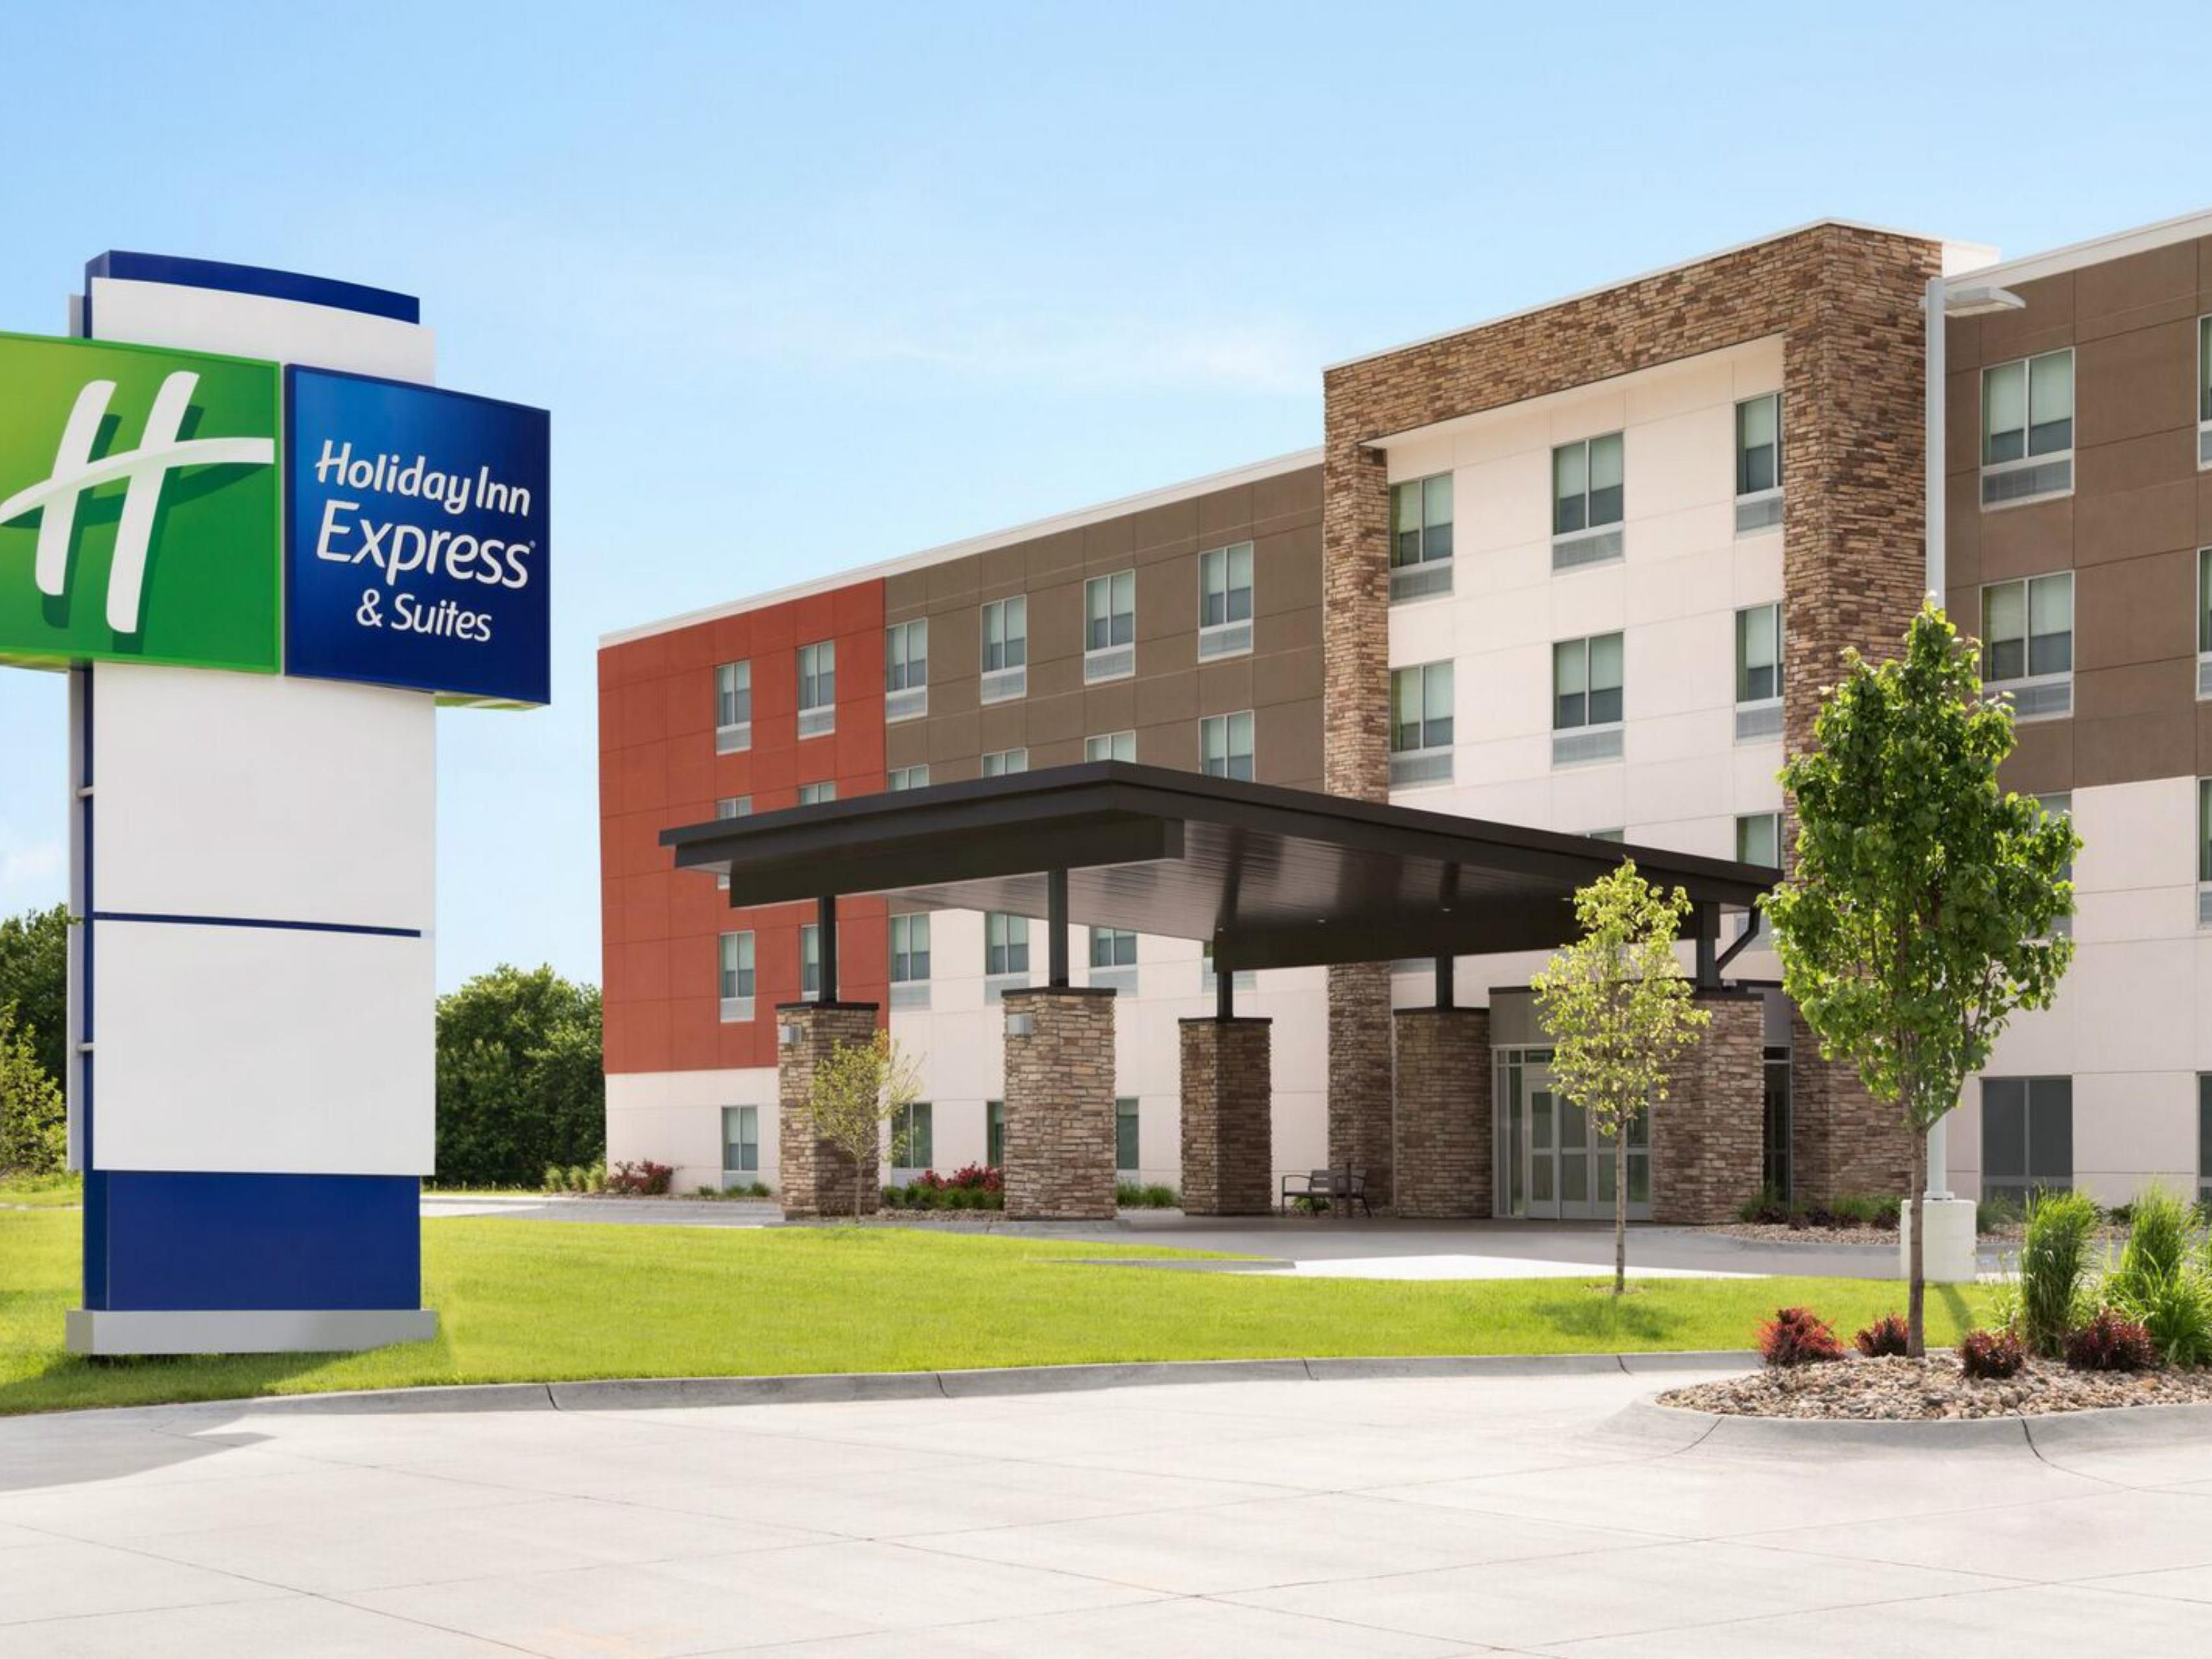 Holiday Inn Express And Suites Ely 5899737474 4x3